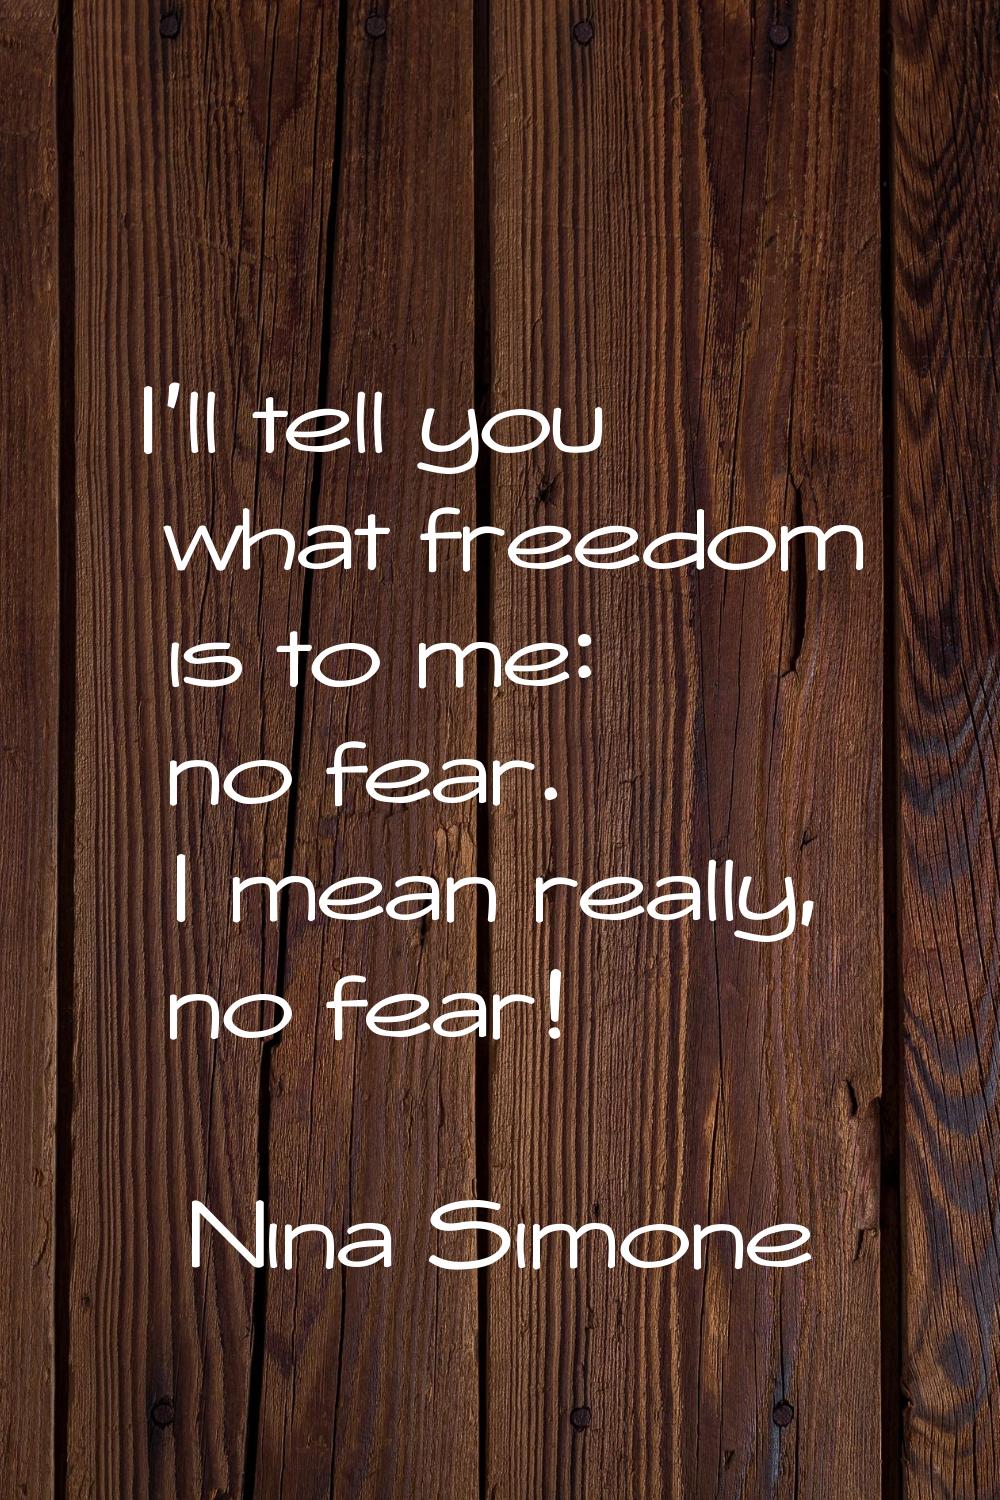 I'll tell you what freedom is to me: no fear. I mean really, no fear!